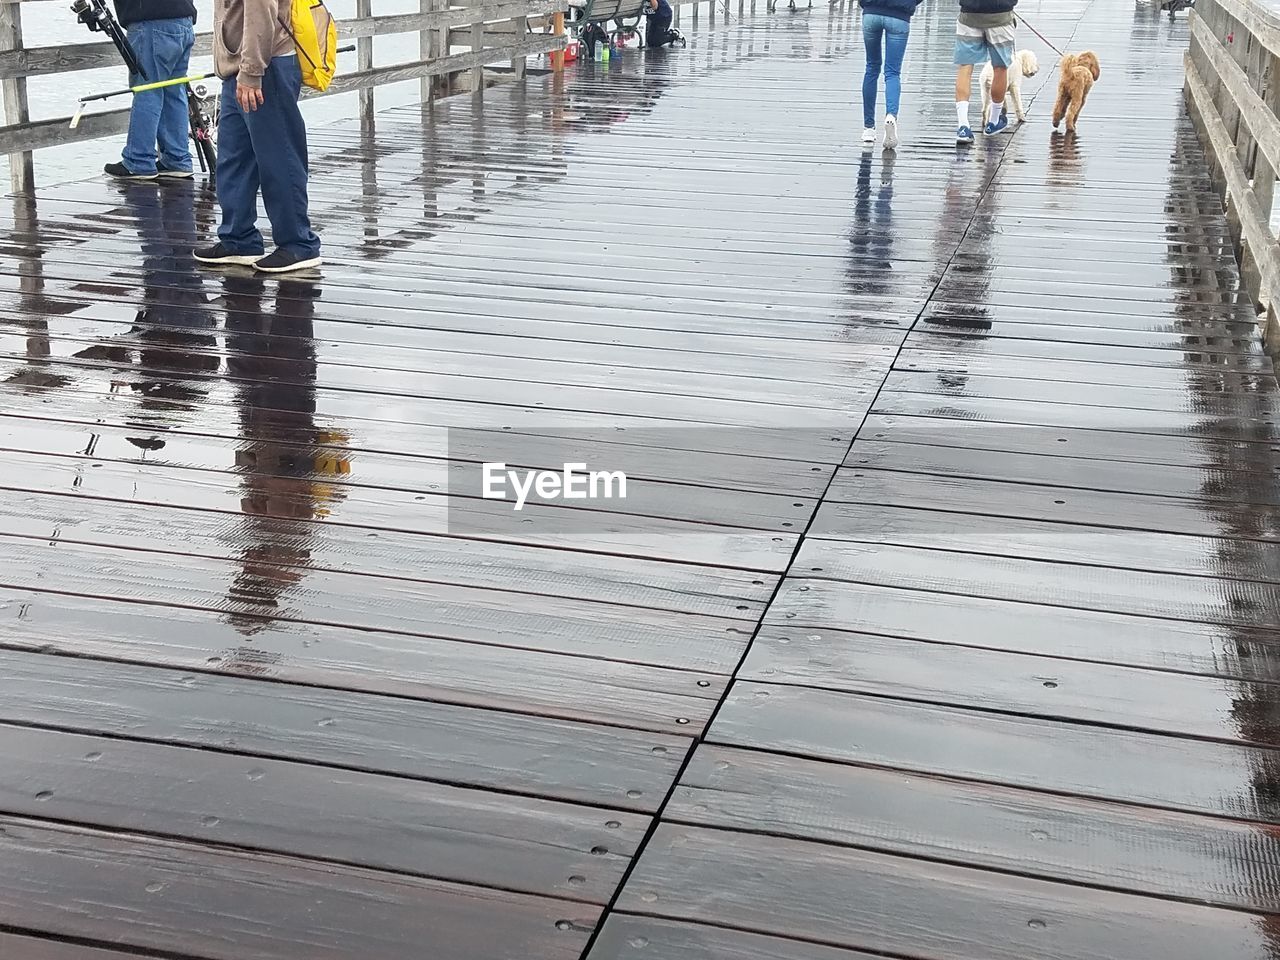 Low section of people on wet pier